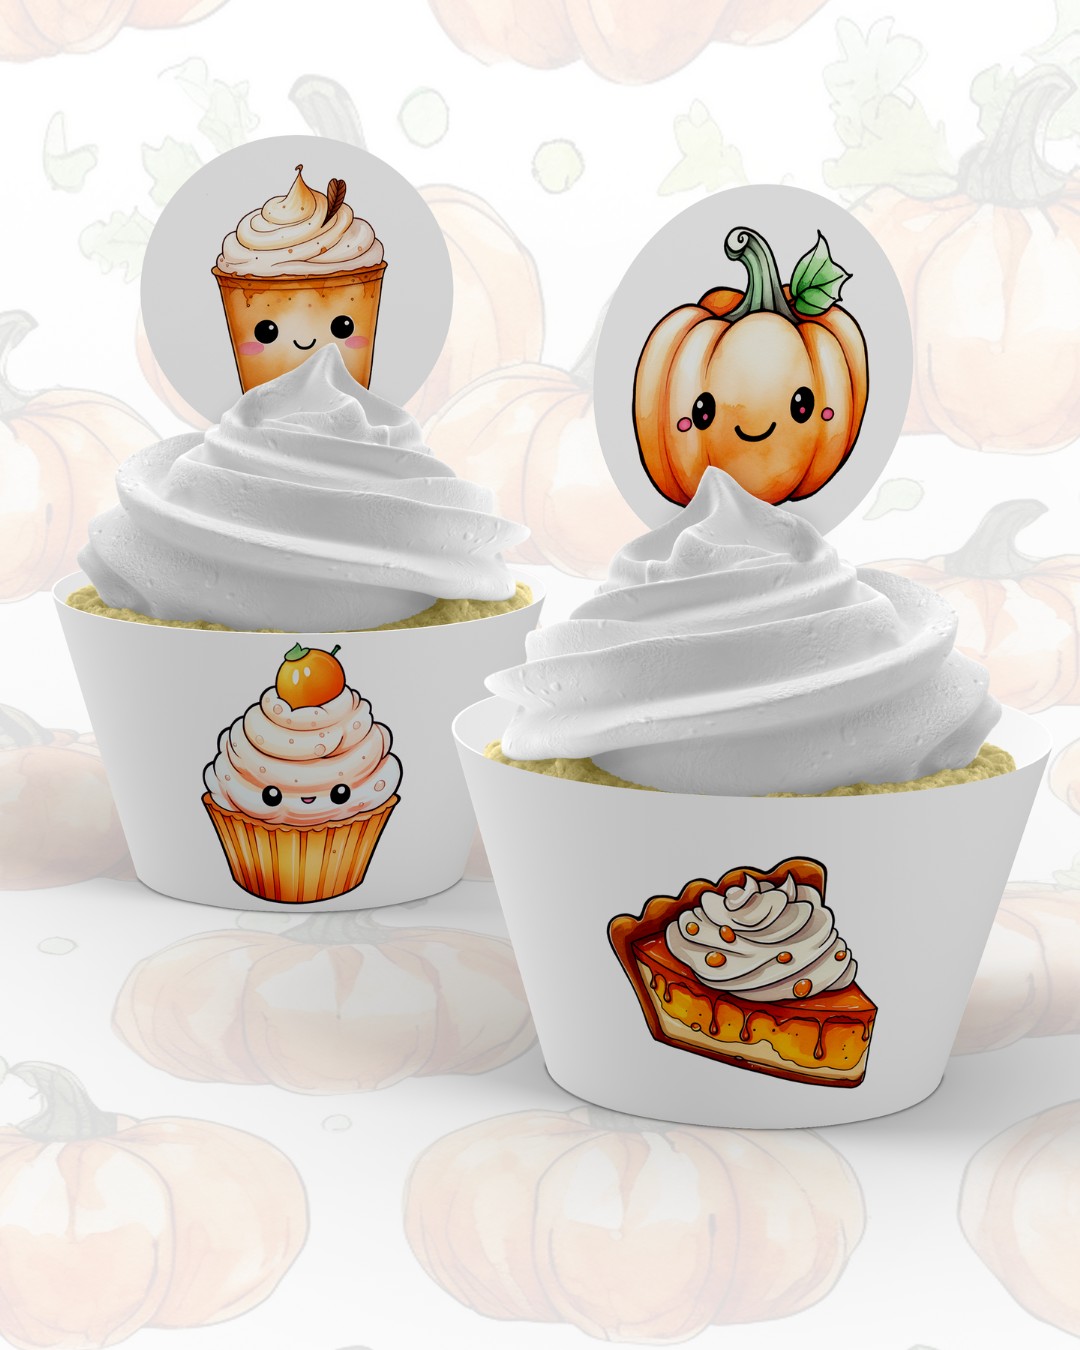 Add a touch of fall to your baking with our pumpkin spice cupcake picks and wrappers. These cute little accents are perfect for any autumn gathering, making your cupcakes not only taste delicious but look festive too. Crafted with love, these picks are a must-have for any pumpkin spice lover. They are easy to use and instantly elevate your cupcakes to the next level. Perfect for Halloween parties, Thanksgiving desserts, or just a cozy night in. #PSL#pumpkinspice#everythingpumpkin#pumpkinseason